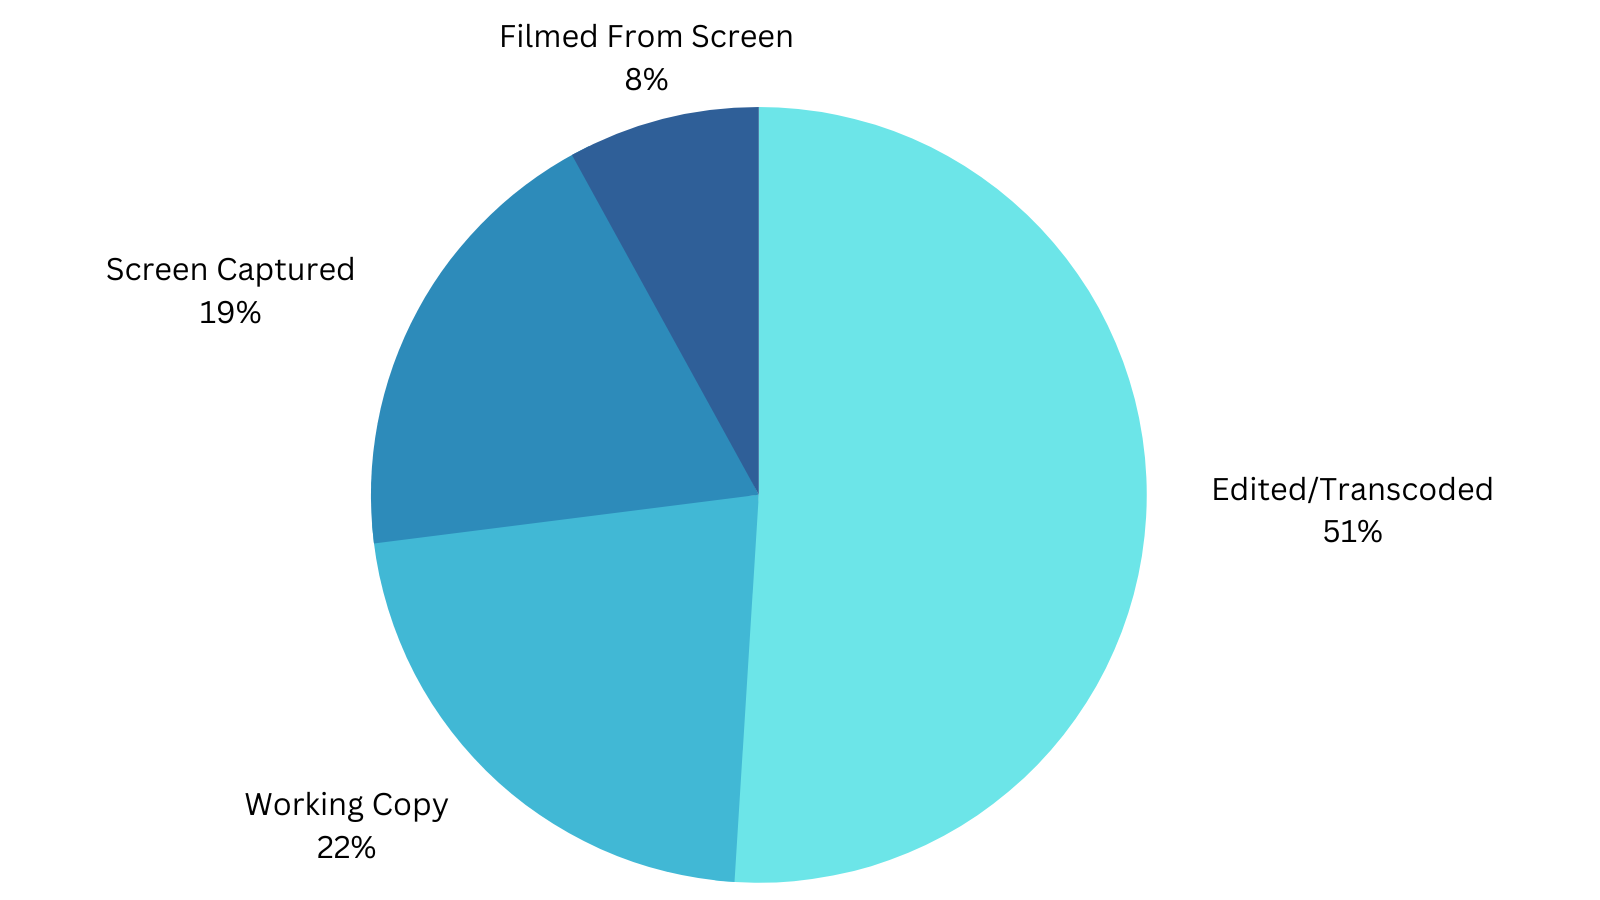 Pie chart showing summary of imagery types submitted to KBC